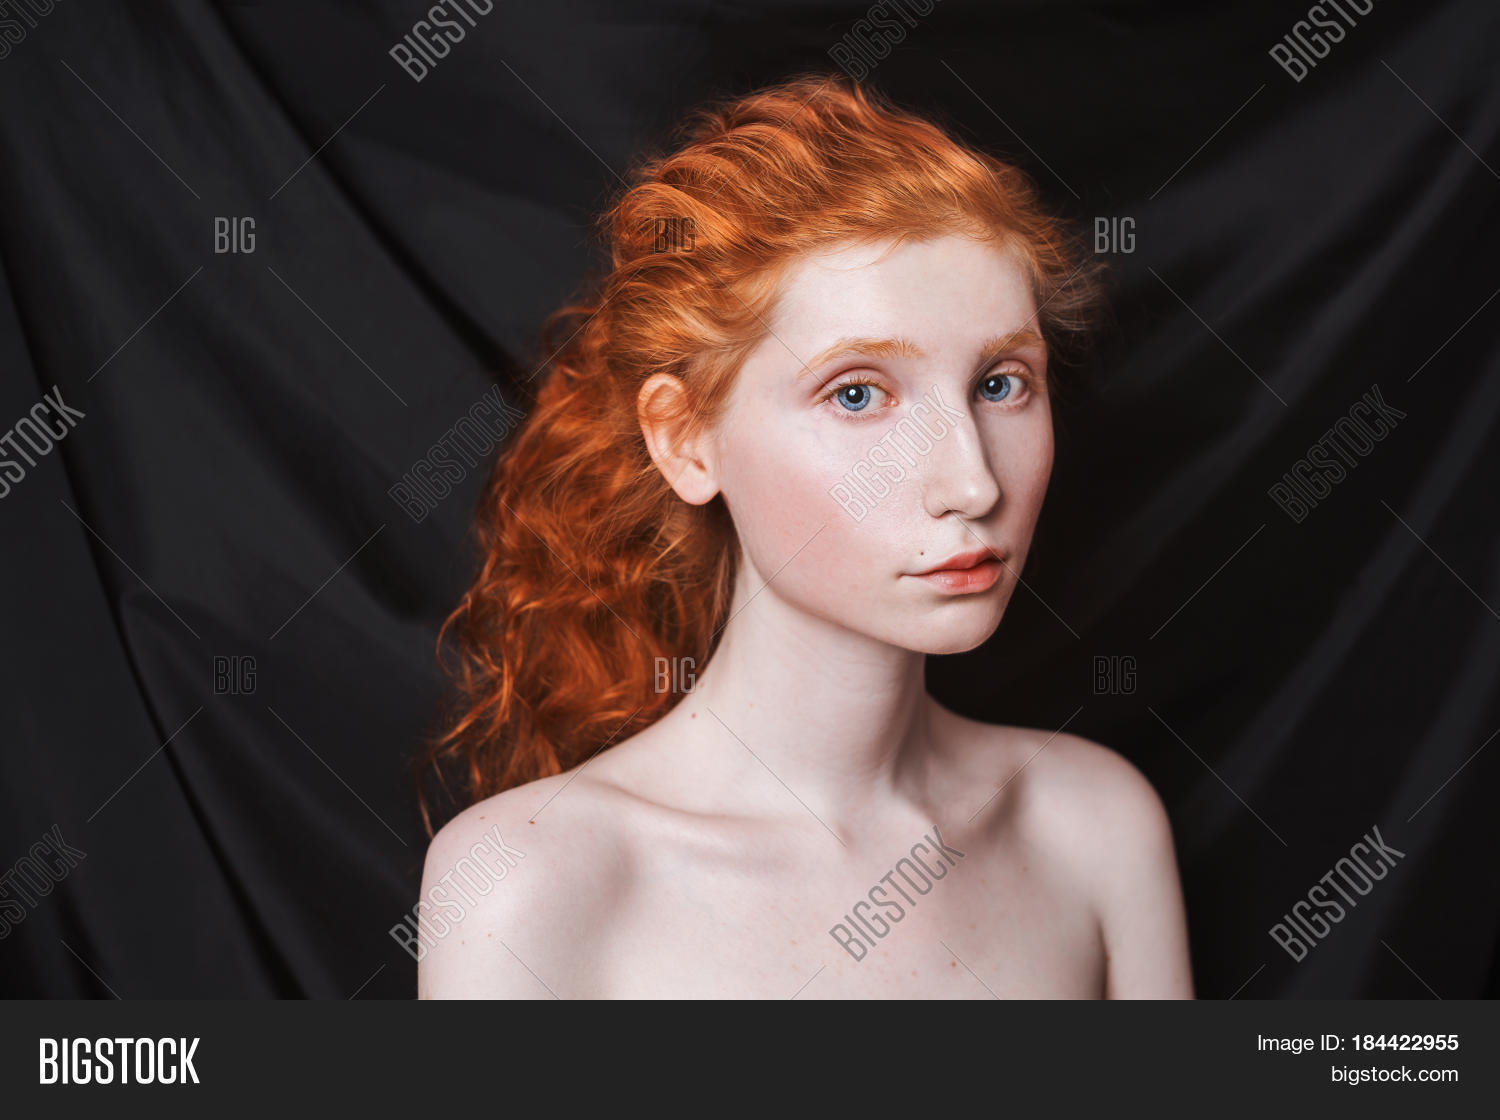 Makeup For Blue Eyes Red Hair Fairy Woman Long Curly Image Photo Free Trial Bigstock